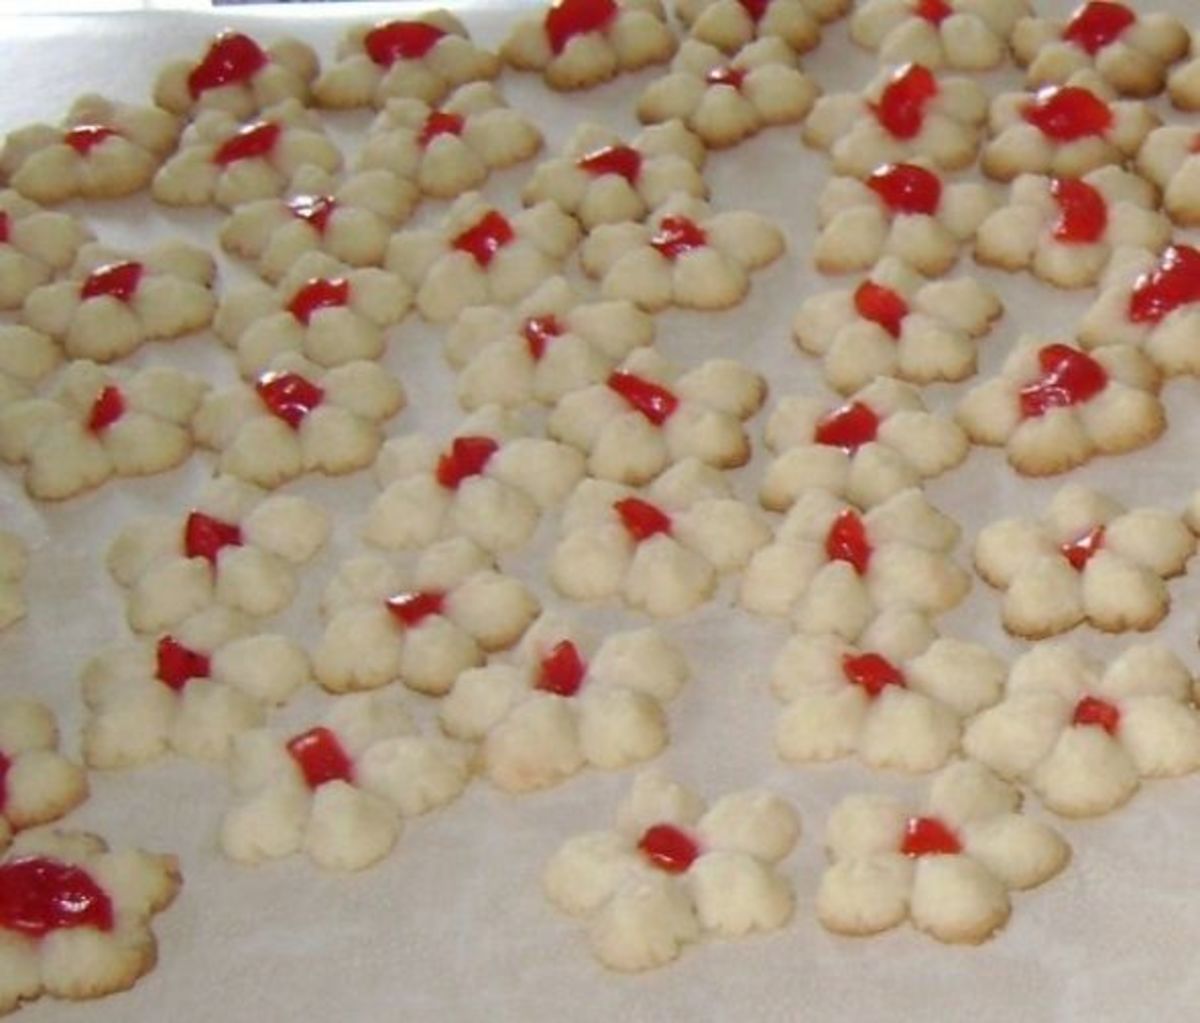 It's really easy to make shortbread cookies! 